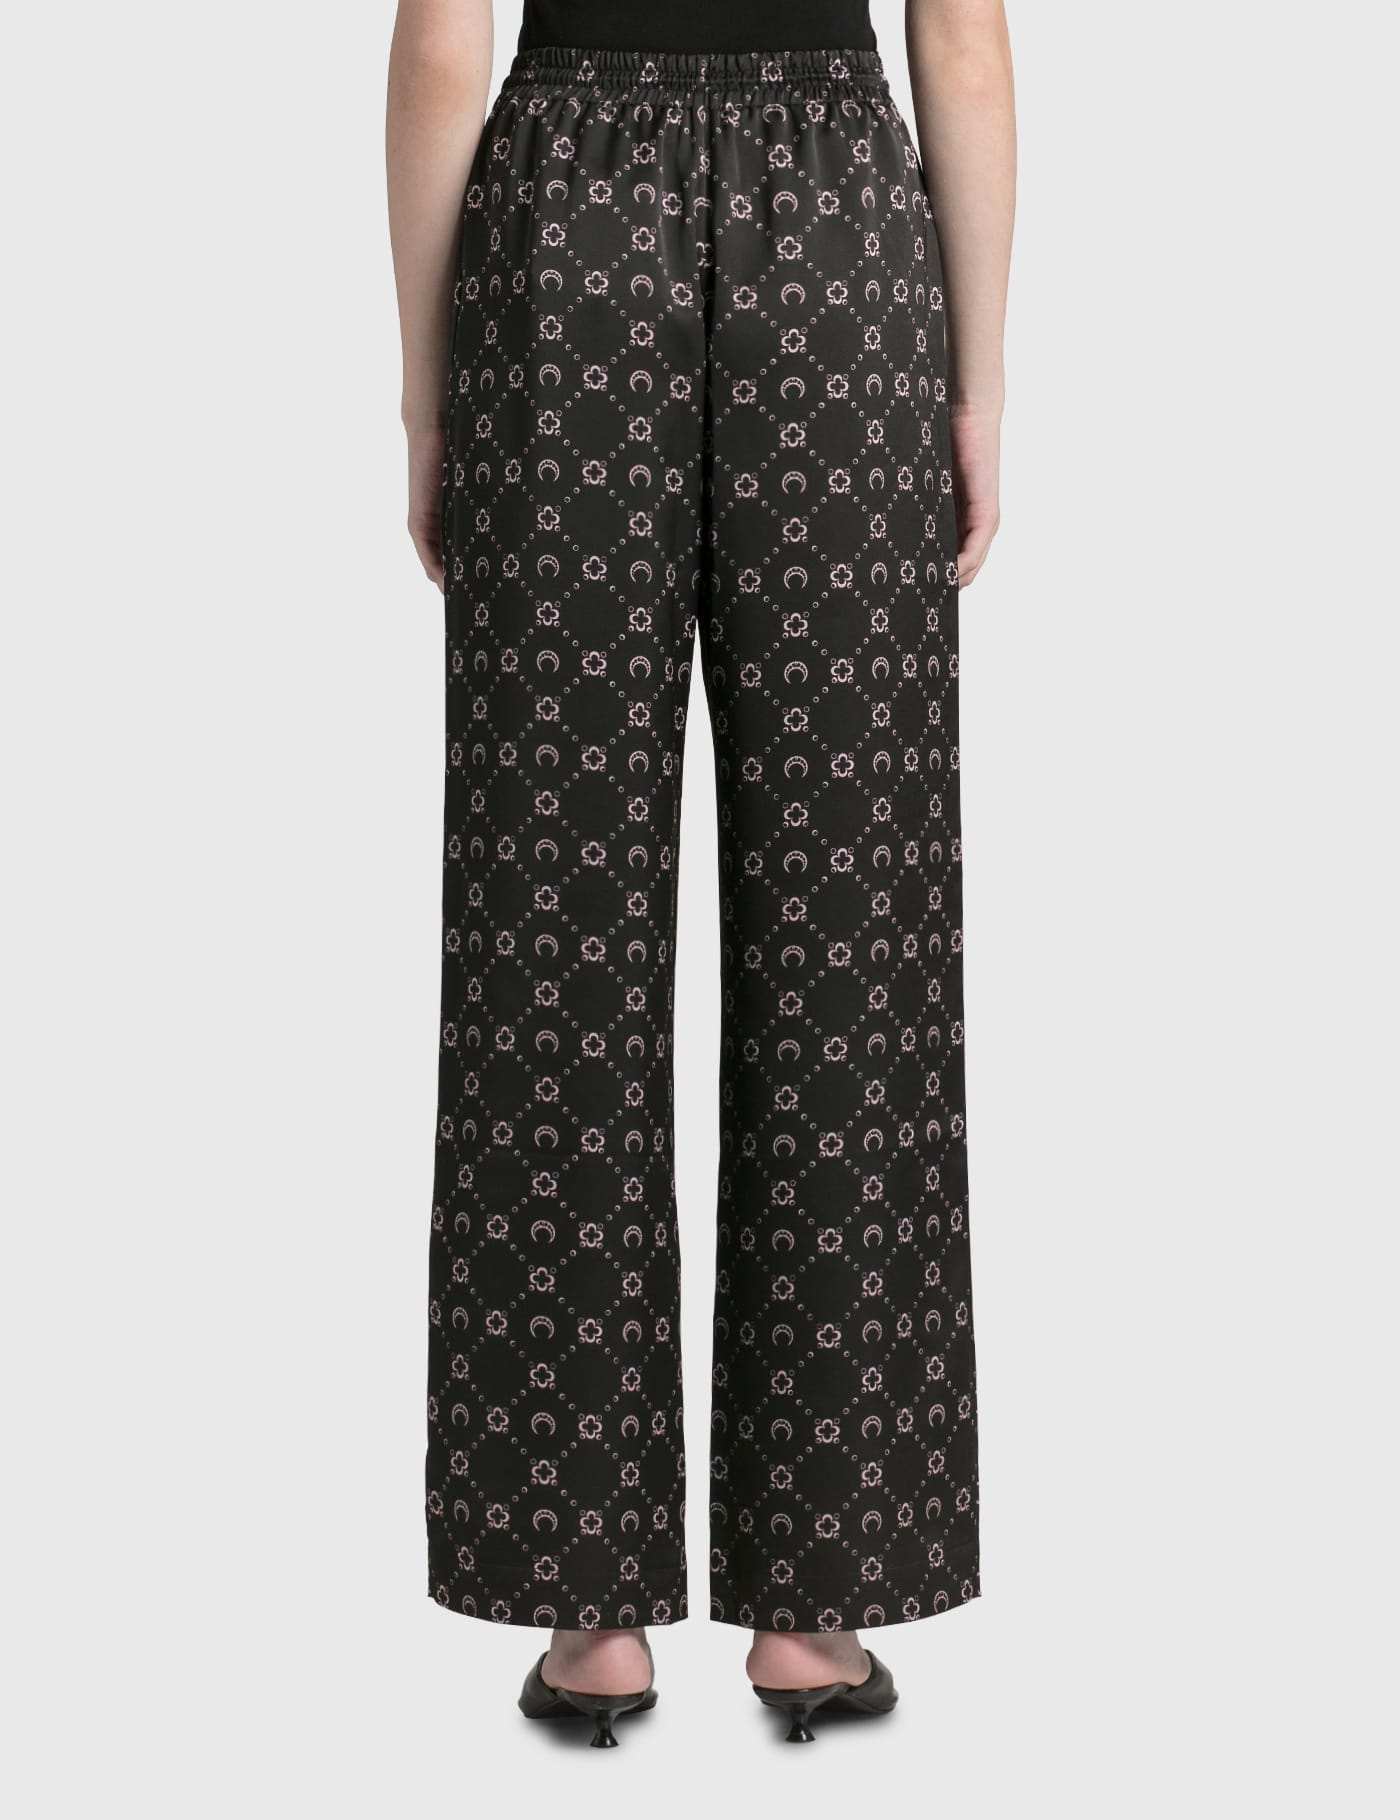 Marine Serre - Monogram Printed Lounge Pants | HBX - Globally Curated  Fashion and Lifestyle by Hypebeast